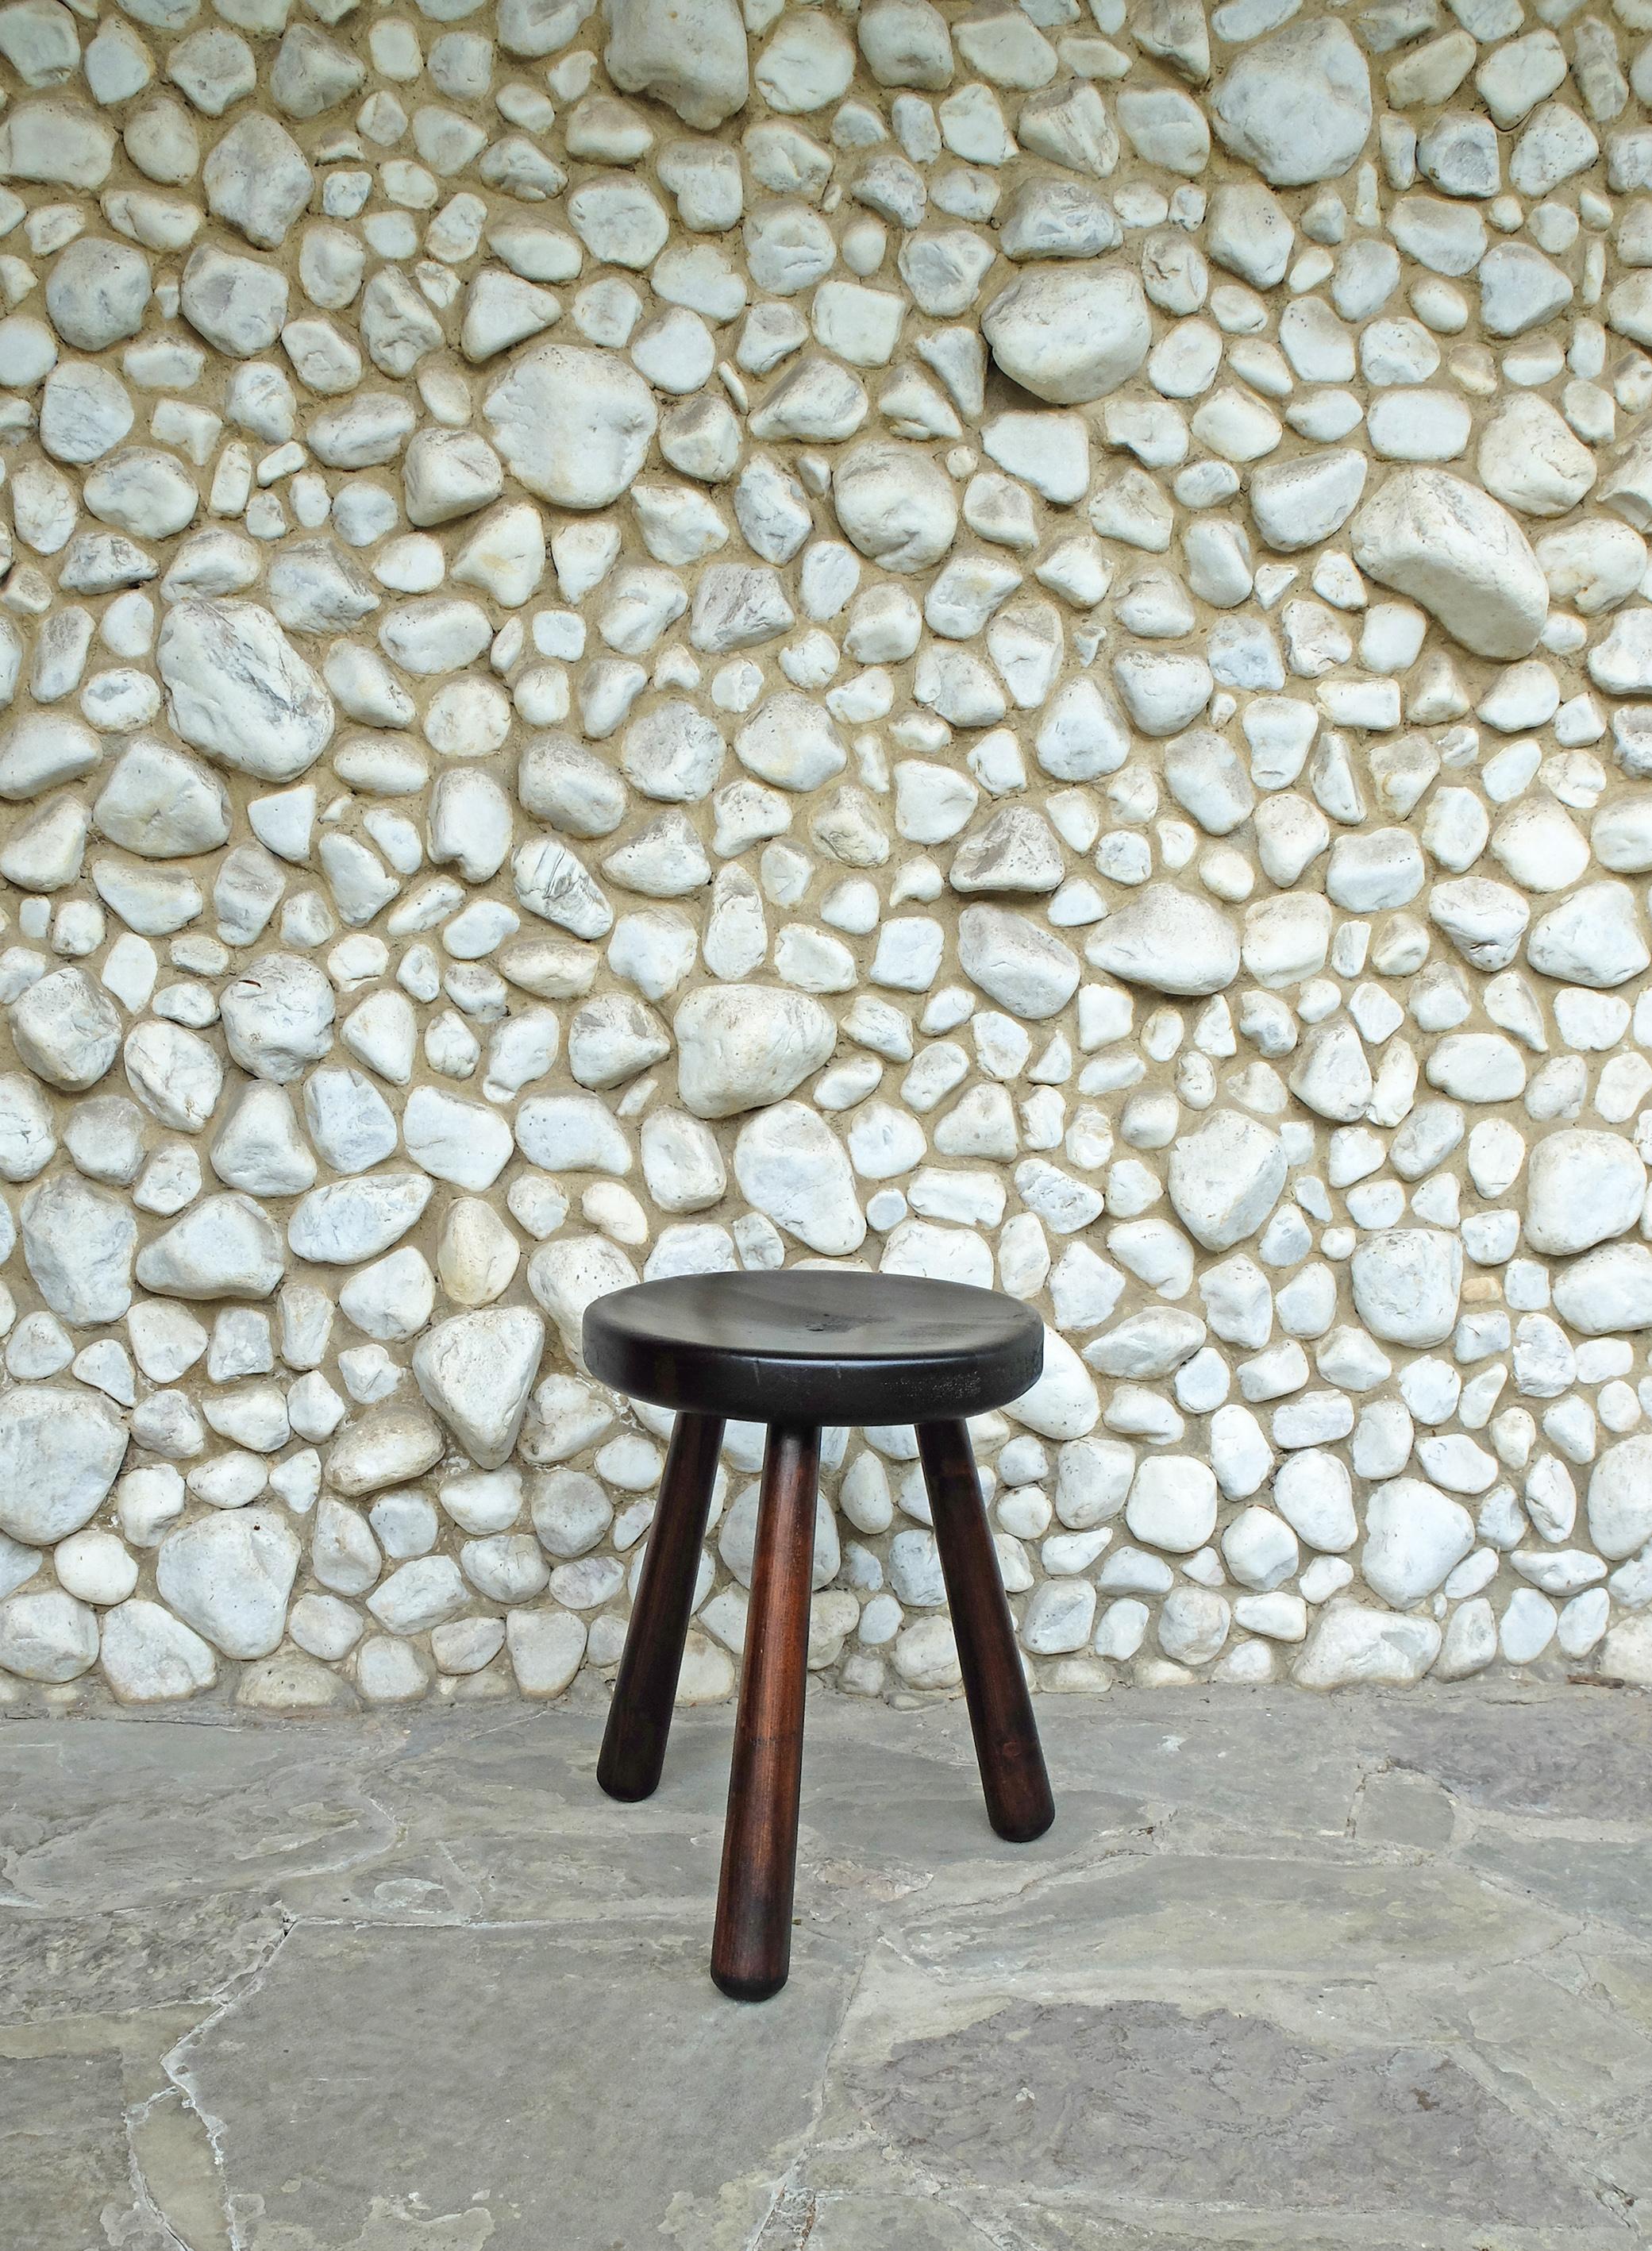 French Tripod Stool in the Style of Les Arcs Stools by Charlotte Perriand, France 1960s